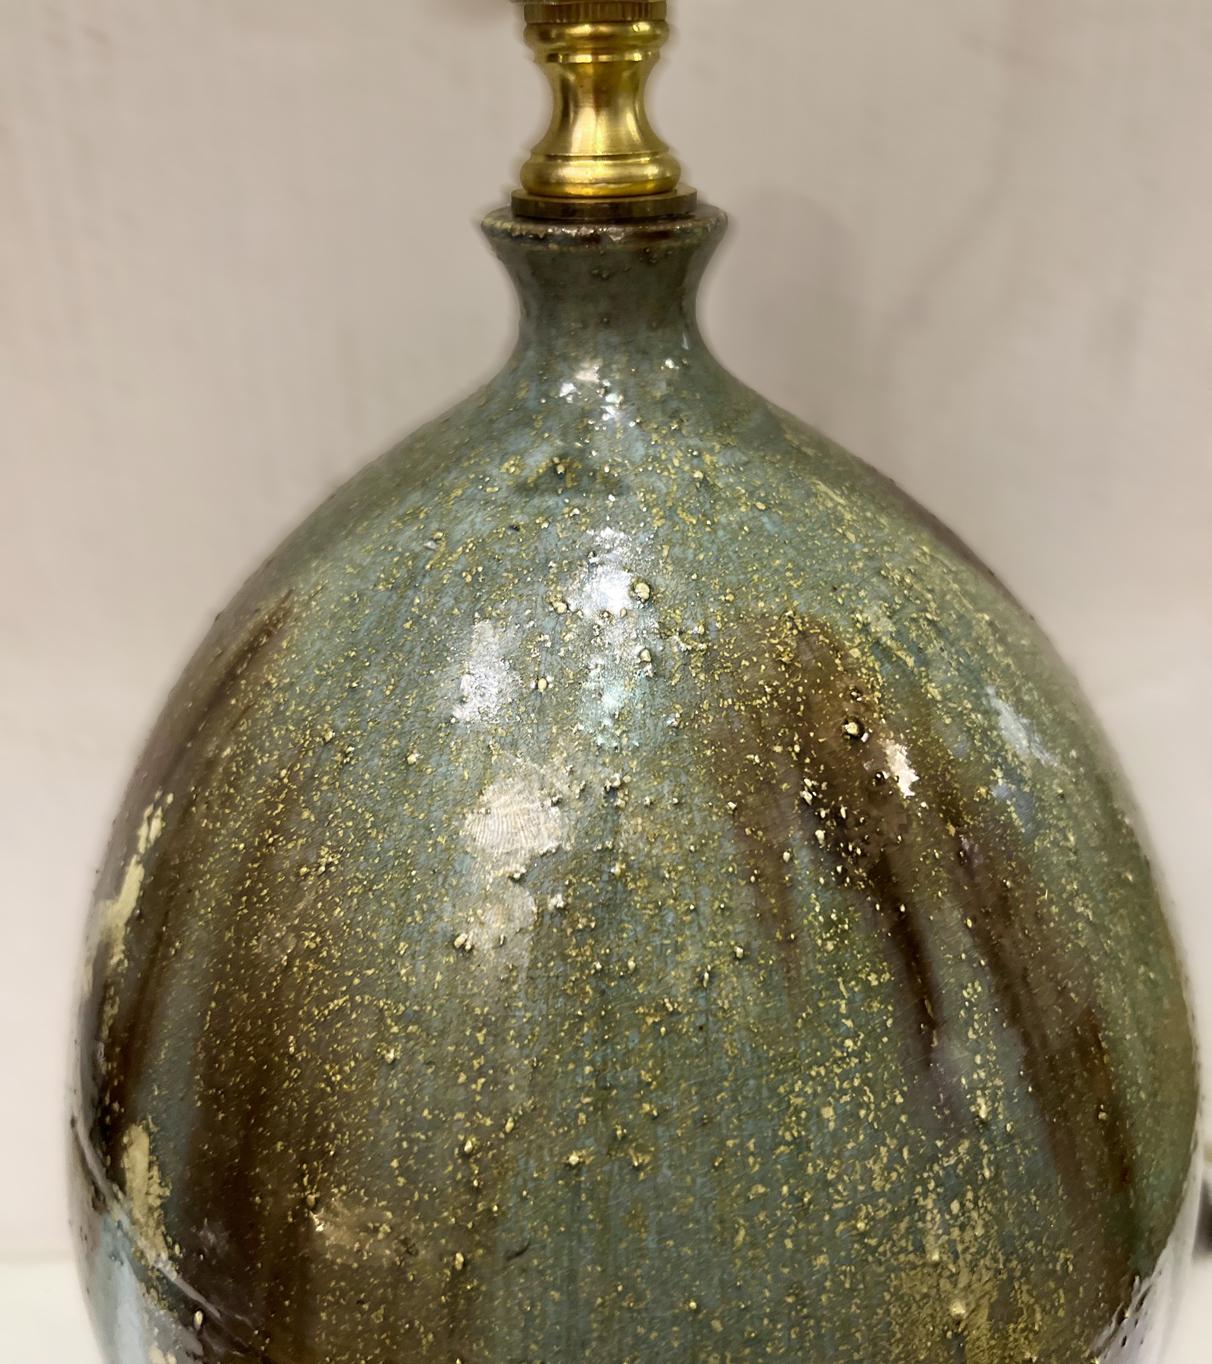 A circa 1960's Italian lazed ceramic table lamp.

Measurements:
Height of body: 14.5